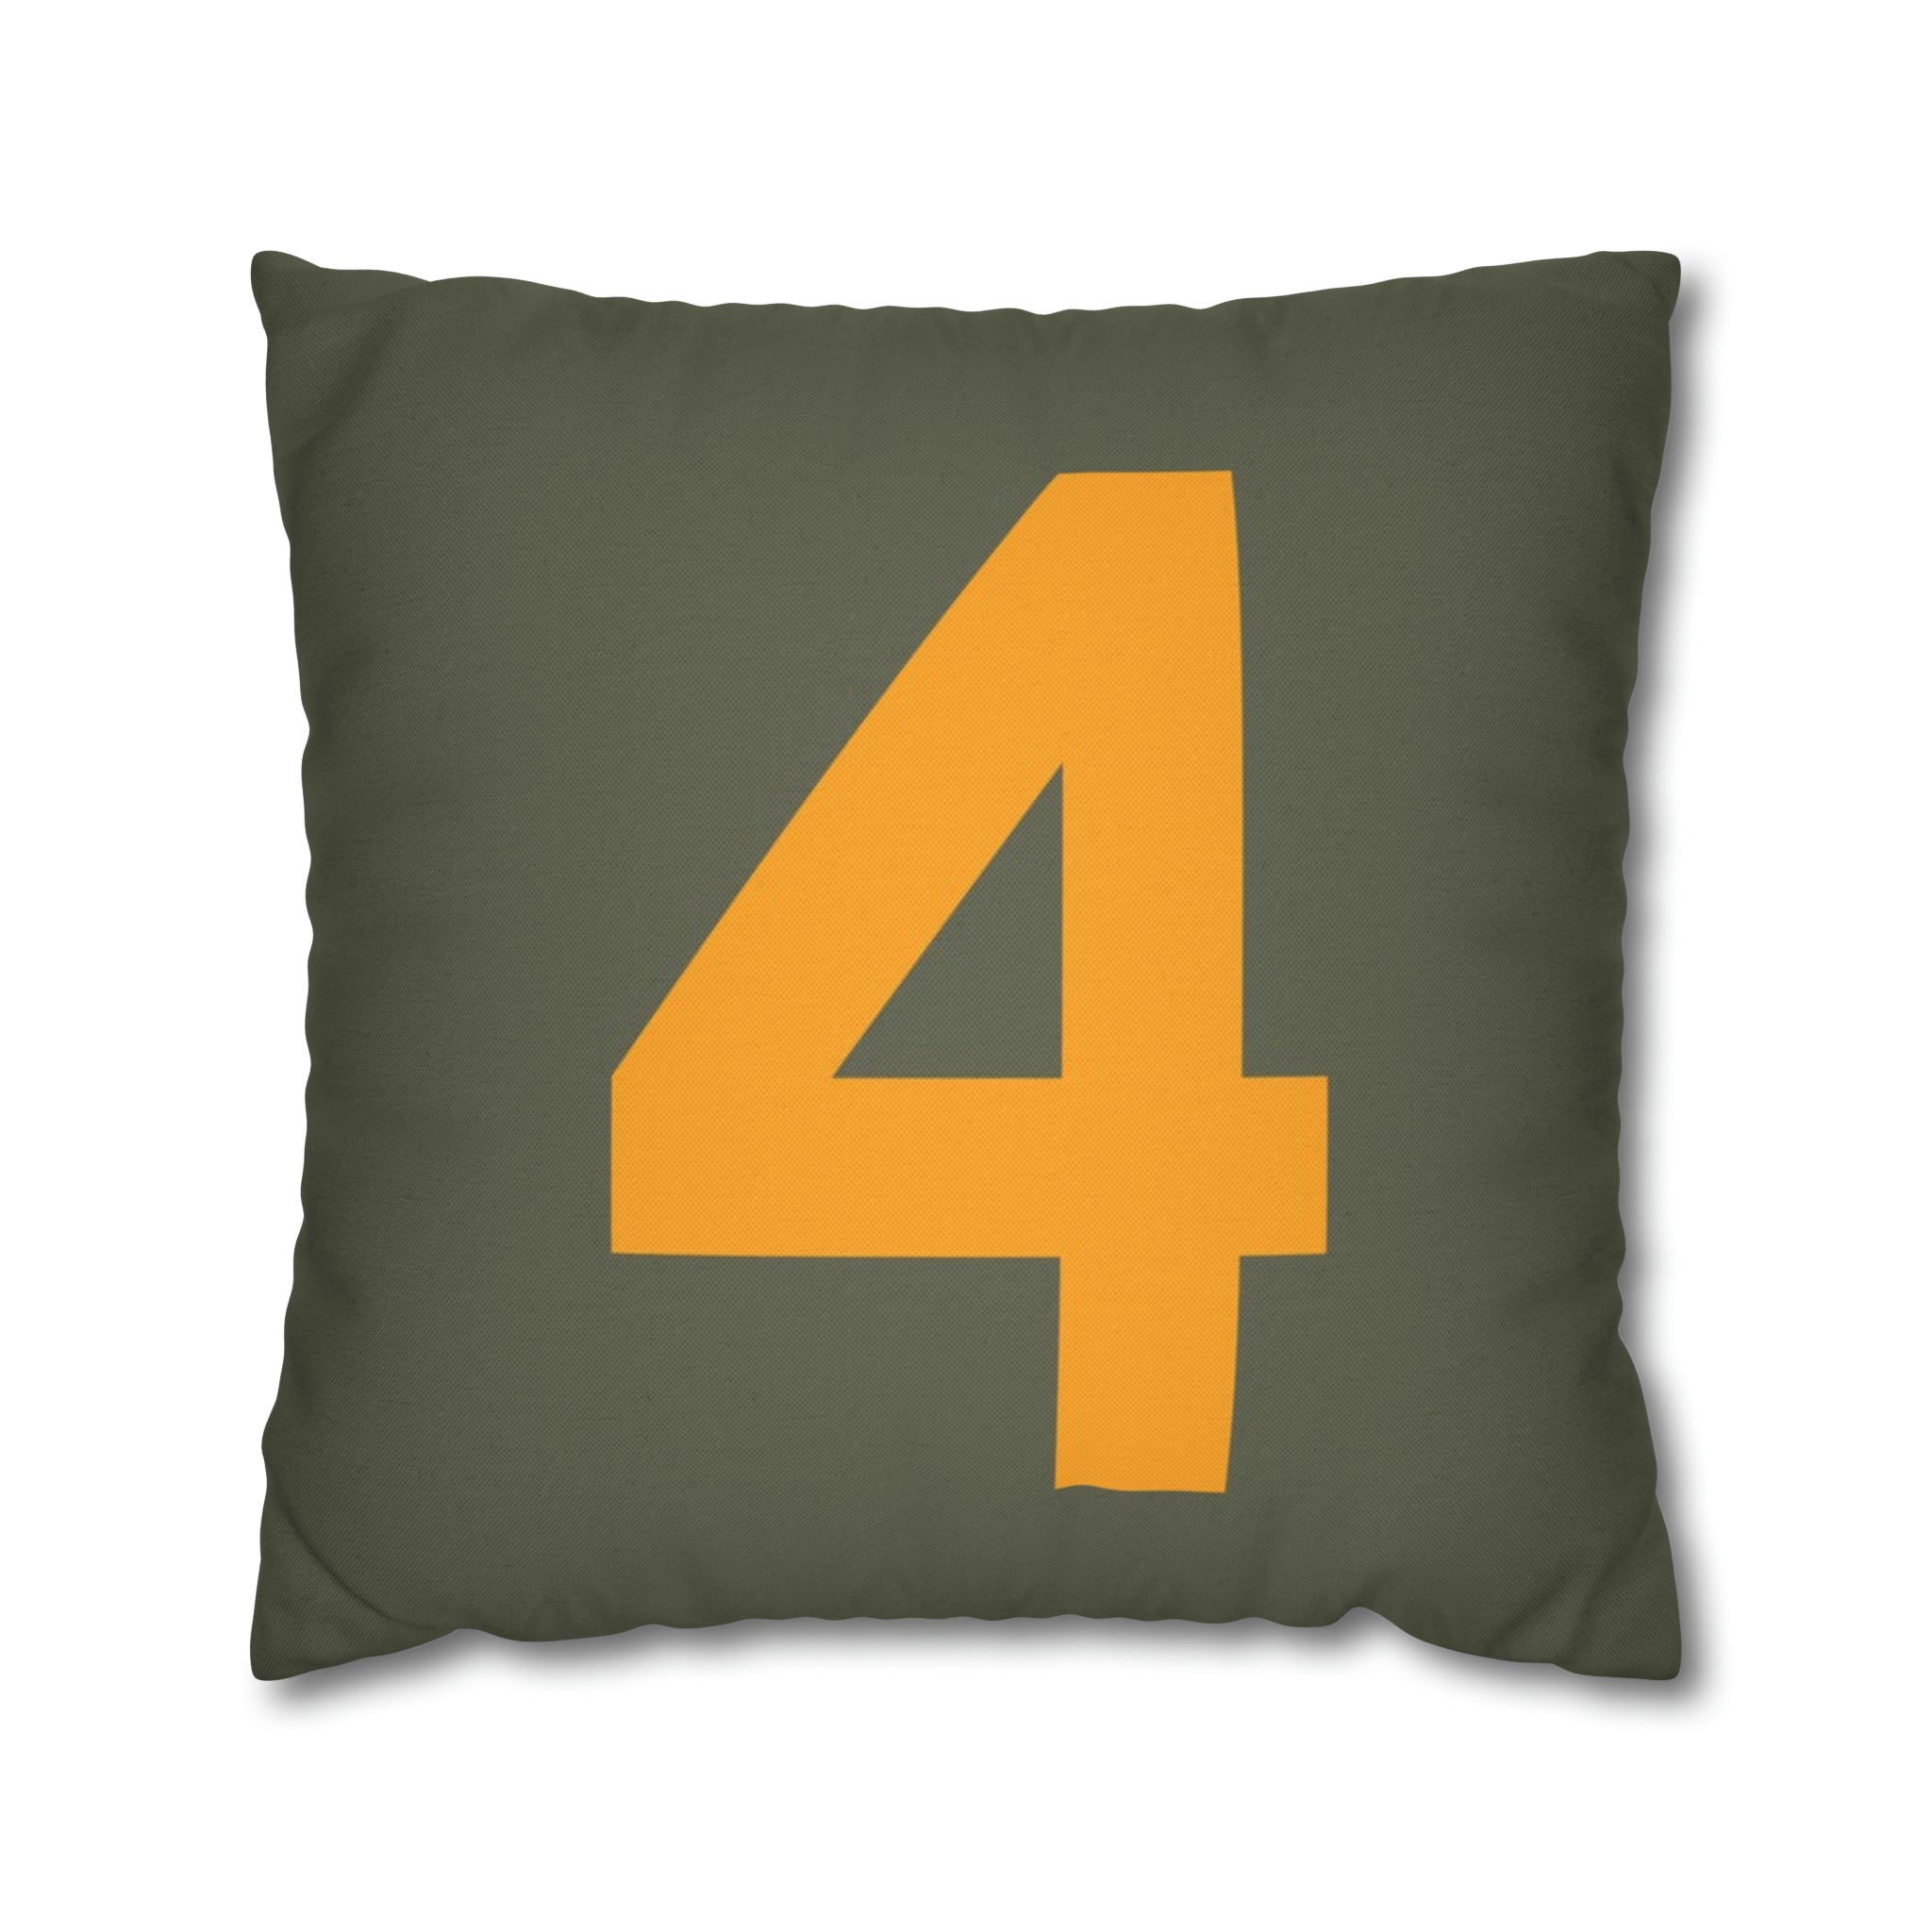 WWII USAAF Number "4" Square Pillowcase - I Love a Hangar